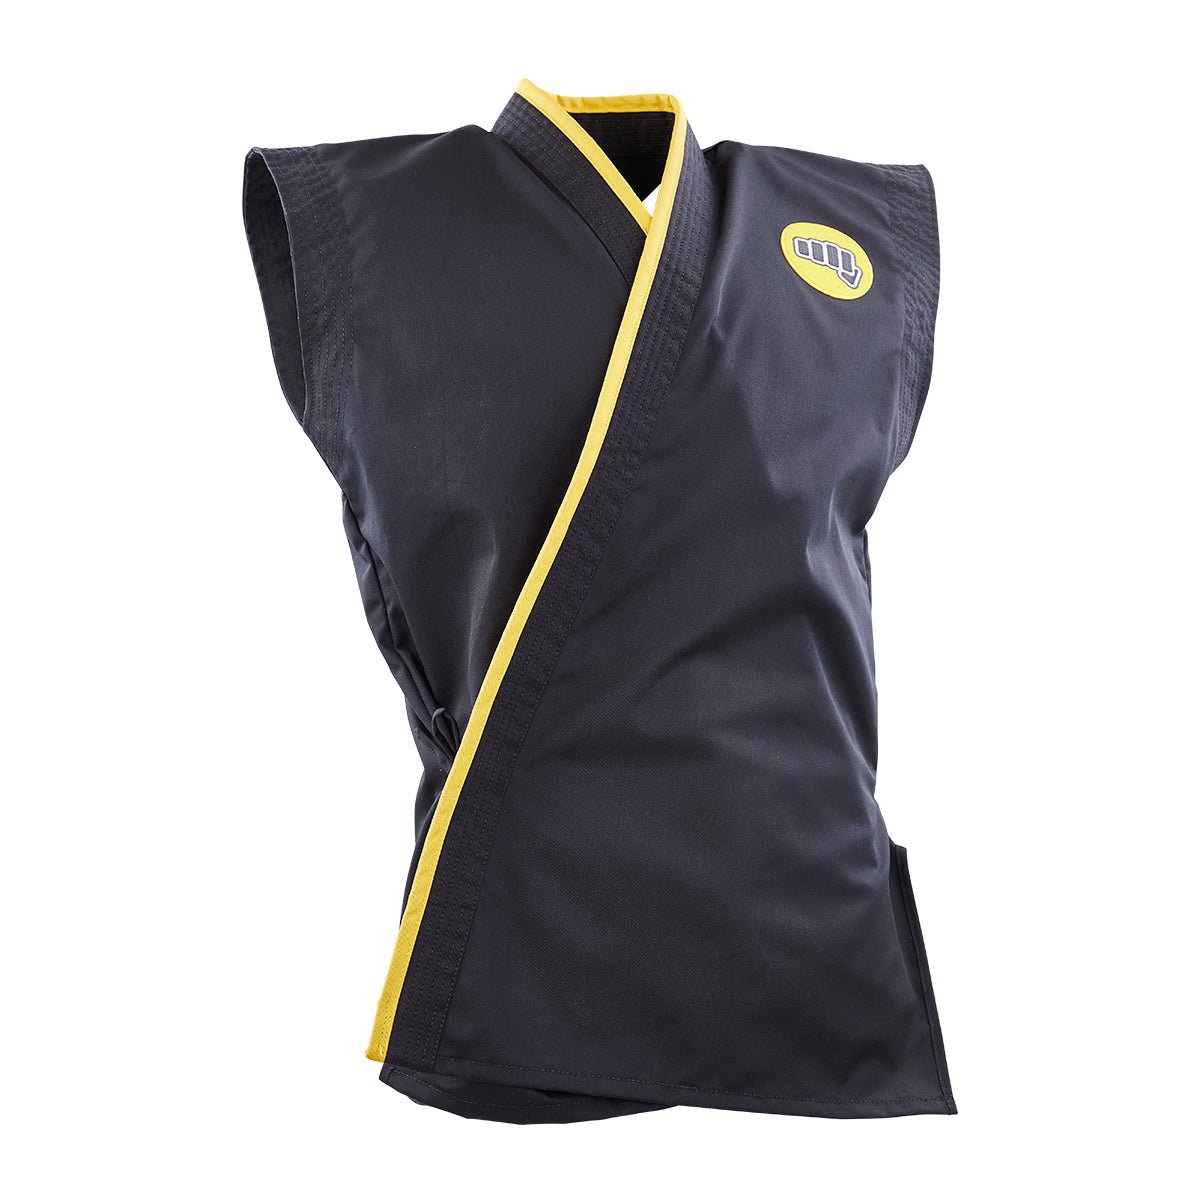 Weightlifting Singlets & Suits — Cobra Weightlifting